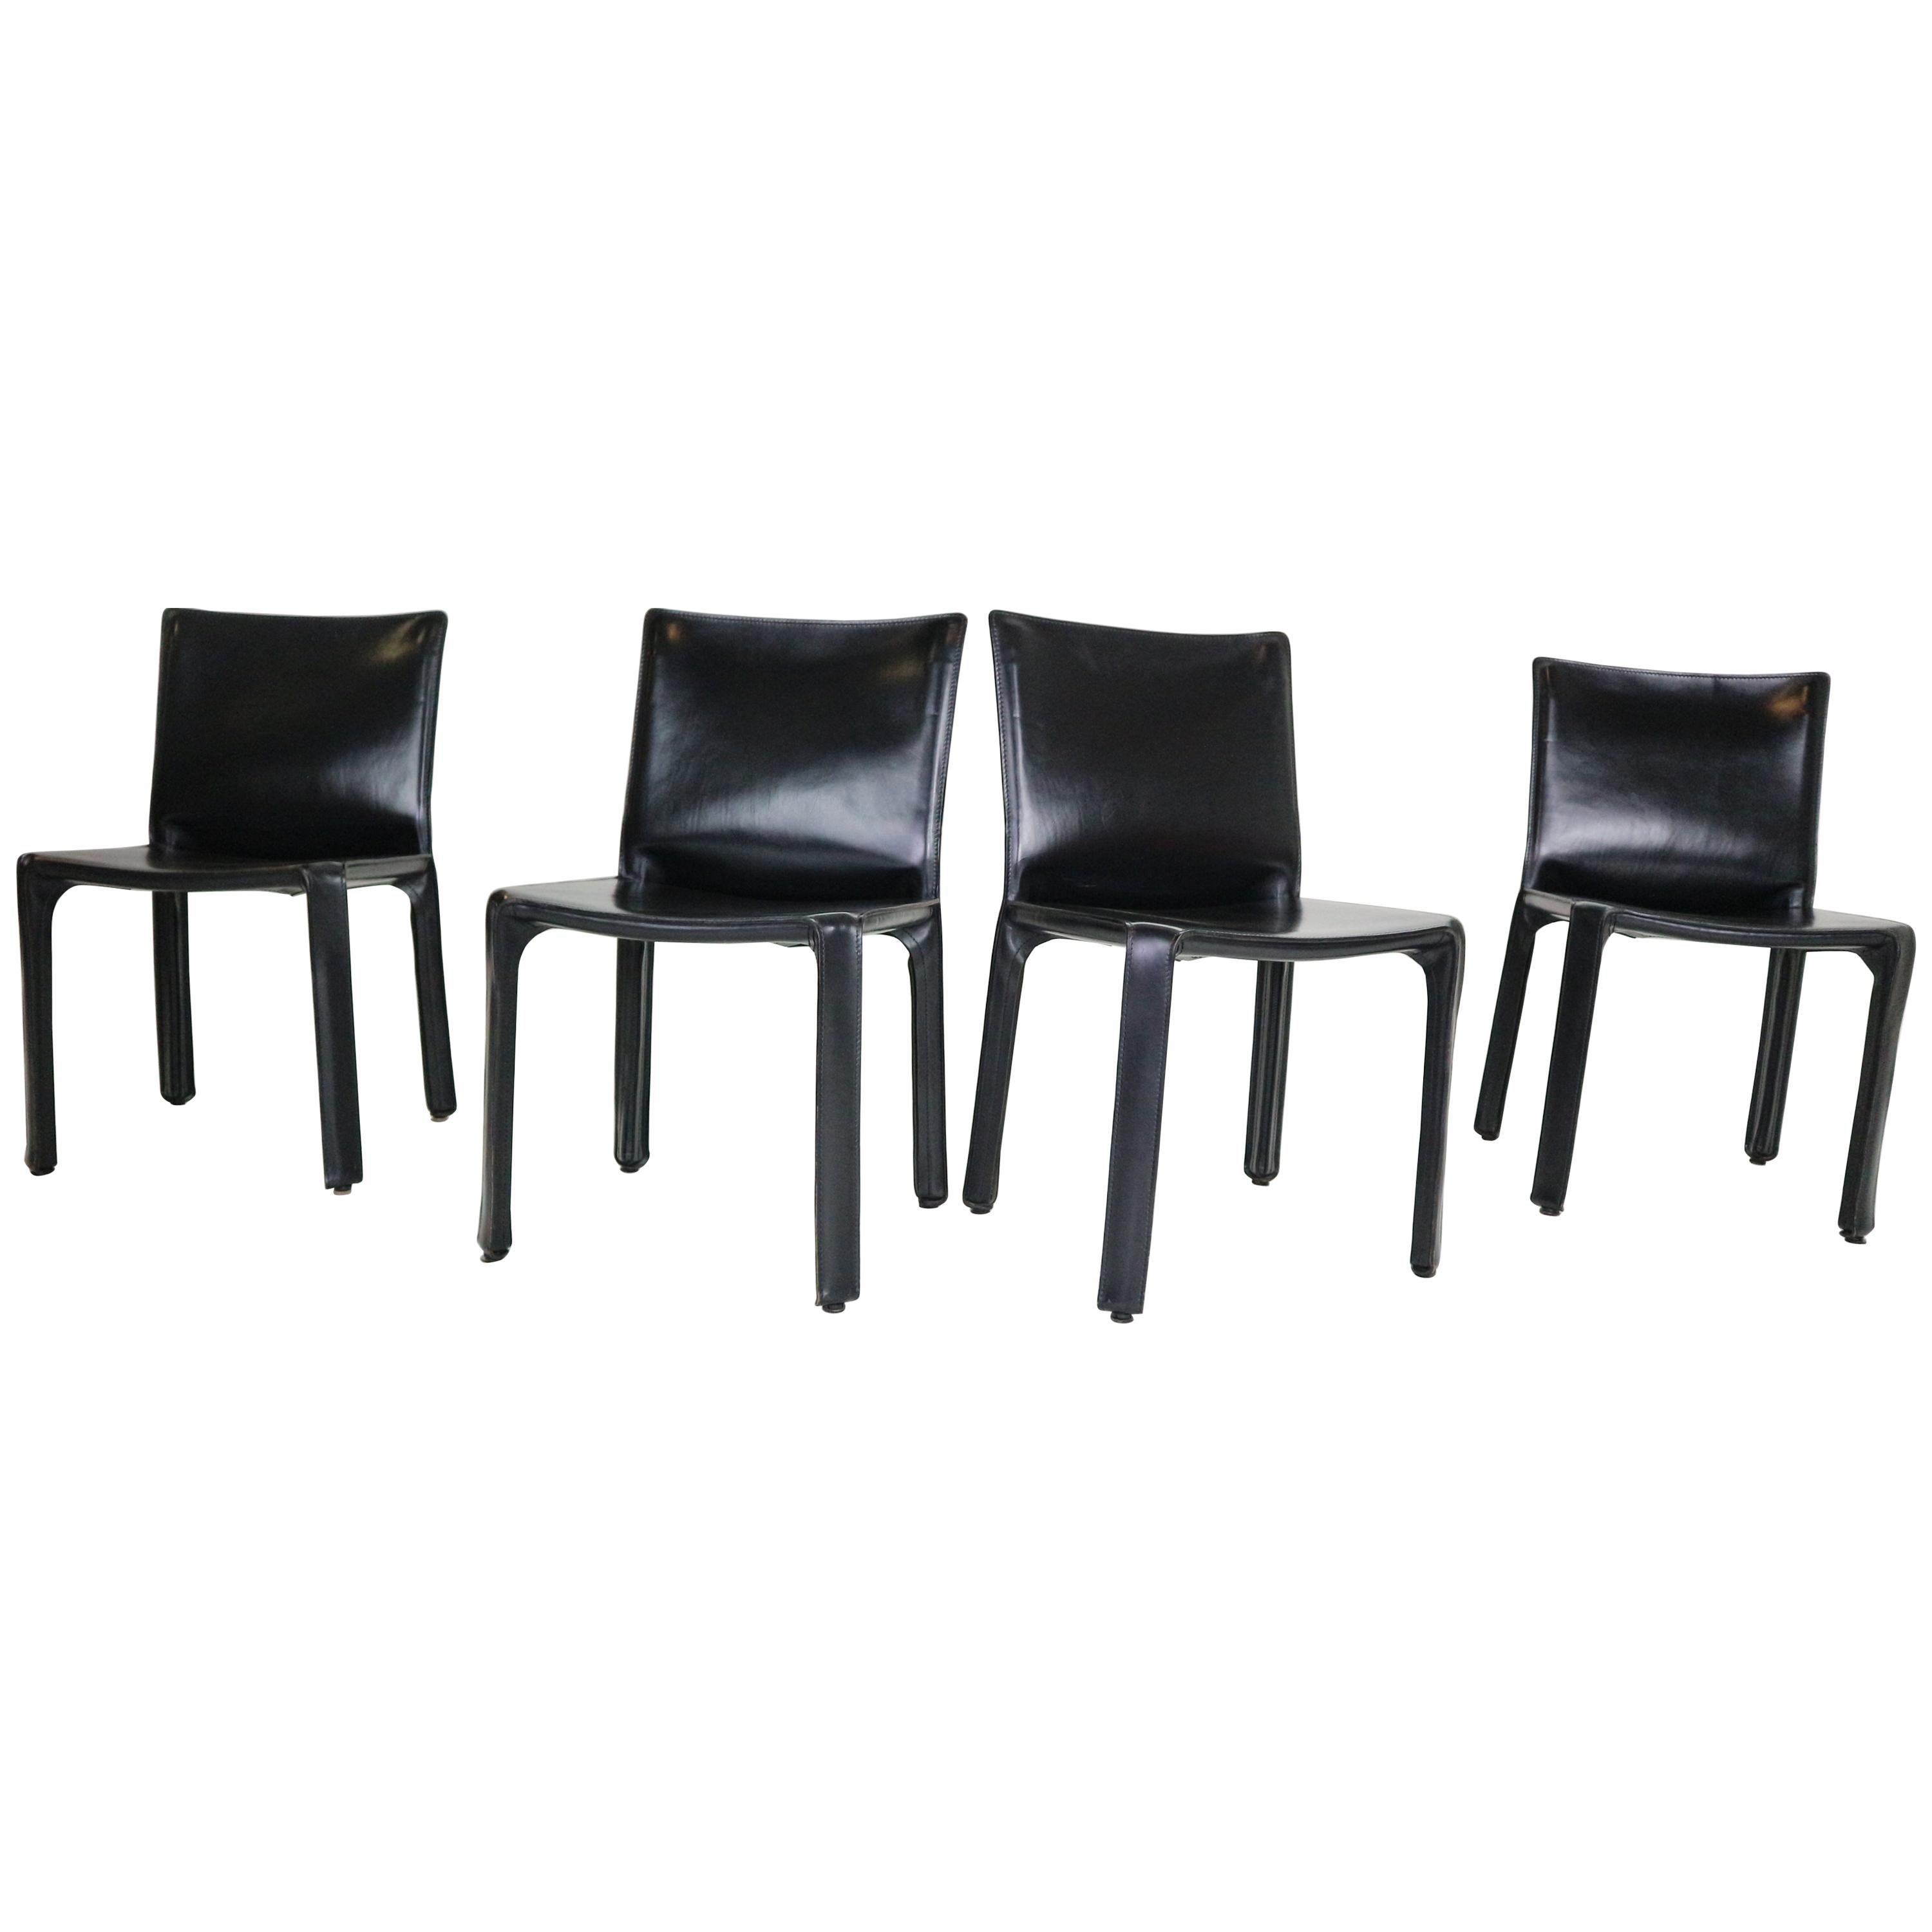 Mario Bellini "Cab-412" Set of 2 Black Leather Chairs for Cassina, 1970